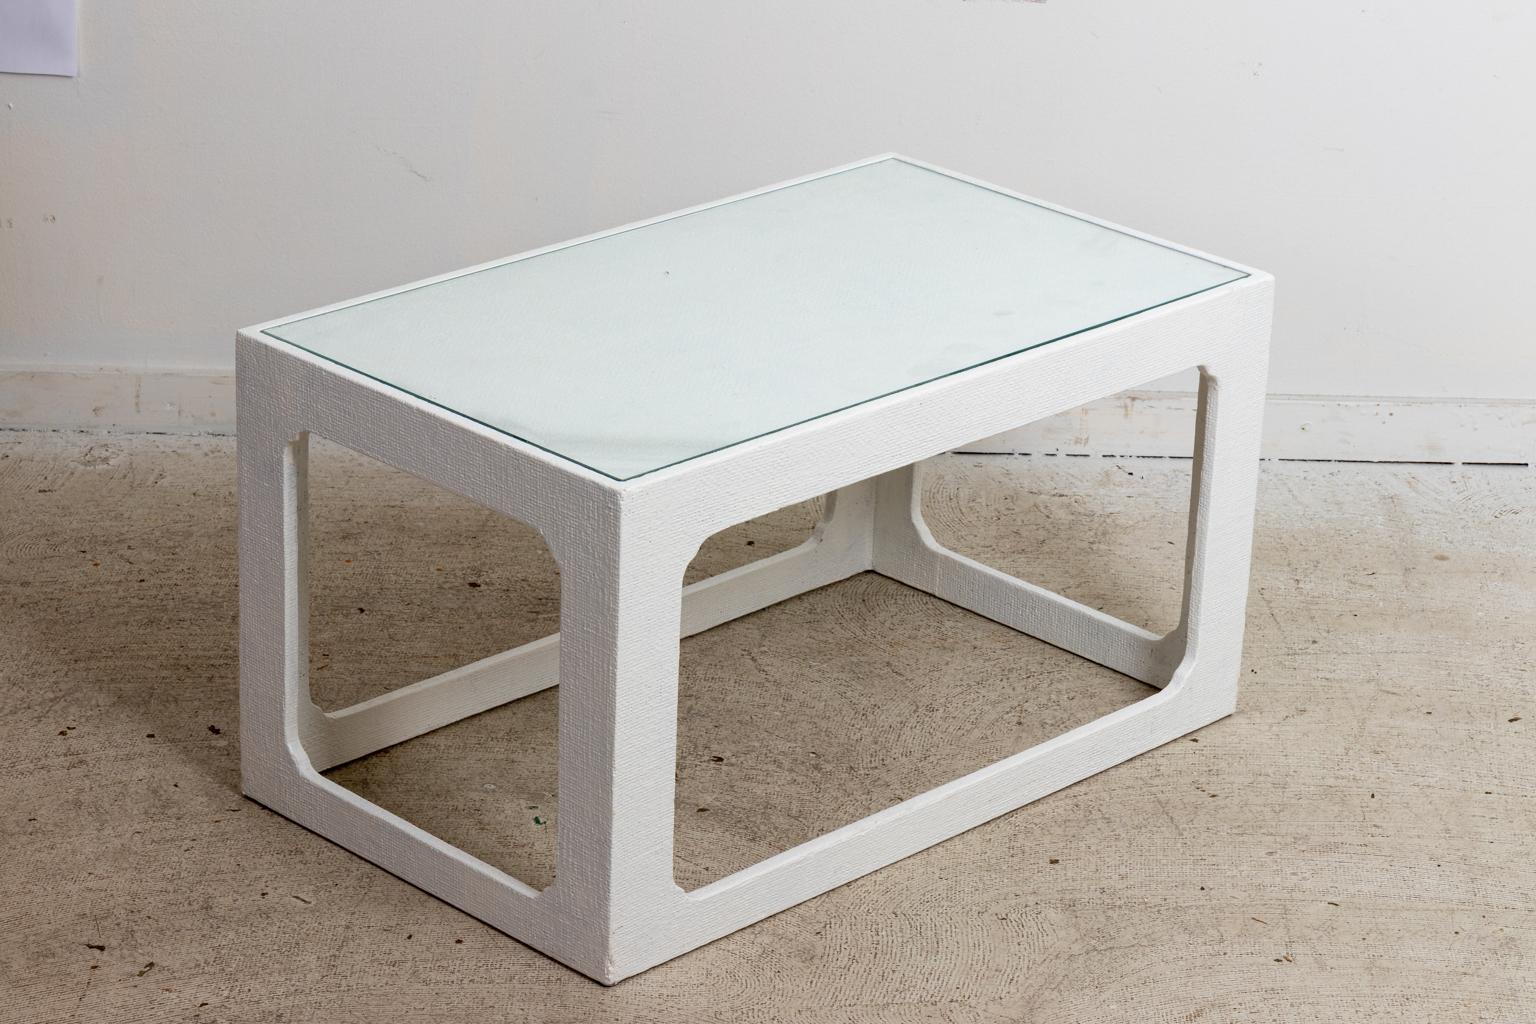 Circa 1970s Mid-Century Modern style white lacquered grass cloth petite low table with set in glass top. Made in the United States. Please note of wear consistent with age. The white lacquer is a latter addition with minor chips to a few corners and